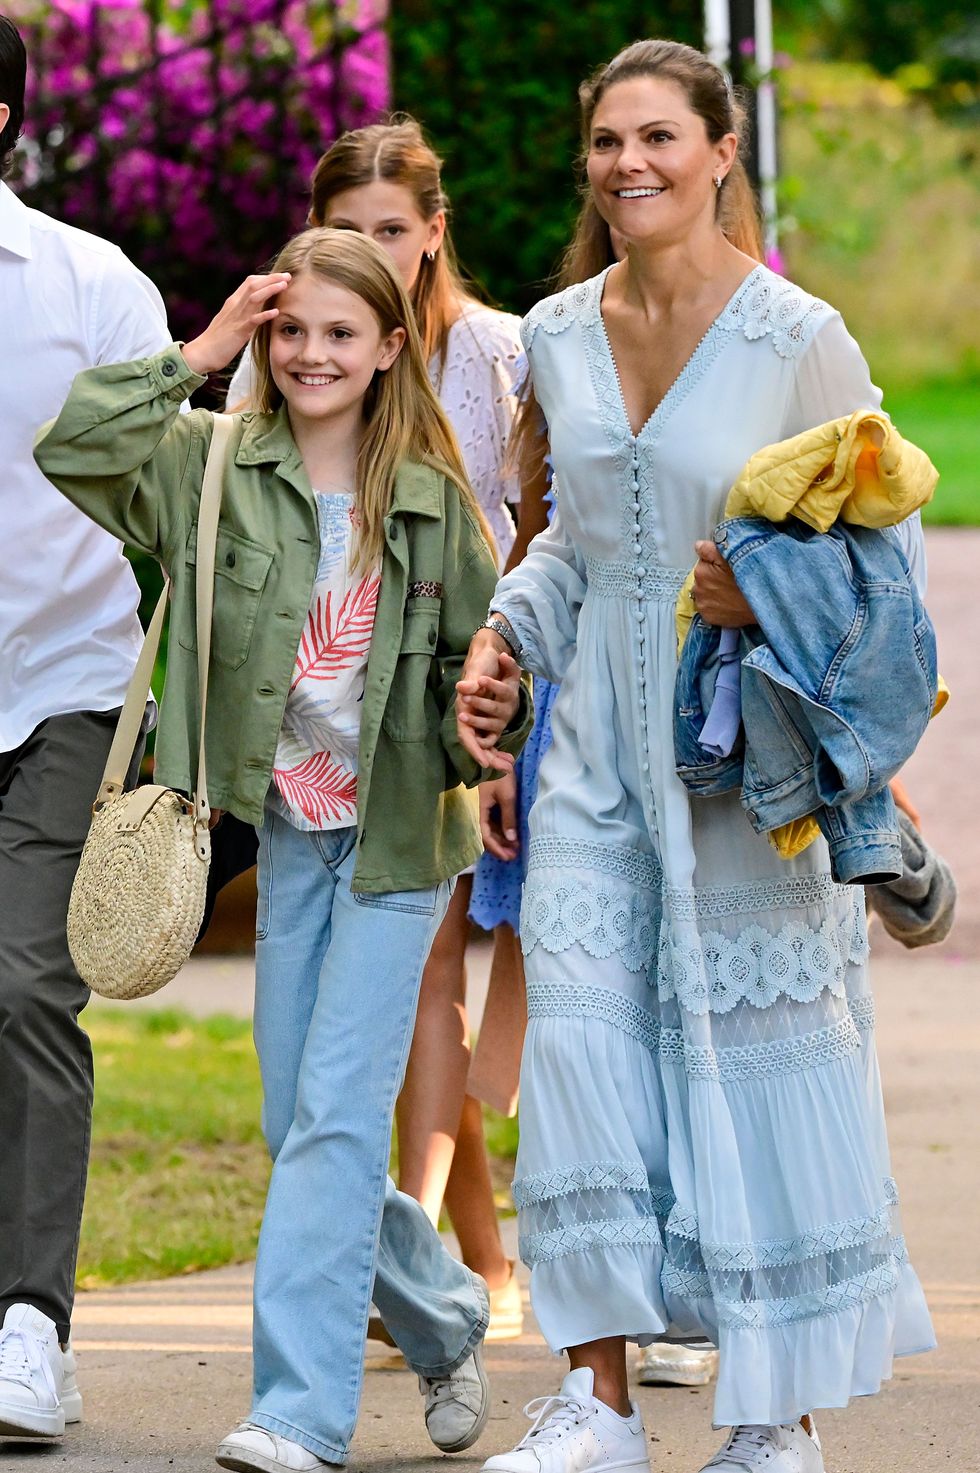 crown princess victoria and princess estelle on their way to the jill johnson concert at solliden sessions swedish royal family at a jill johnson concert at solliden sessions, borgholm, sweden 13 jul 2022